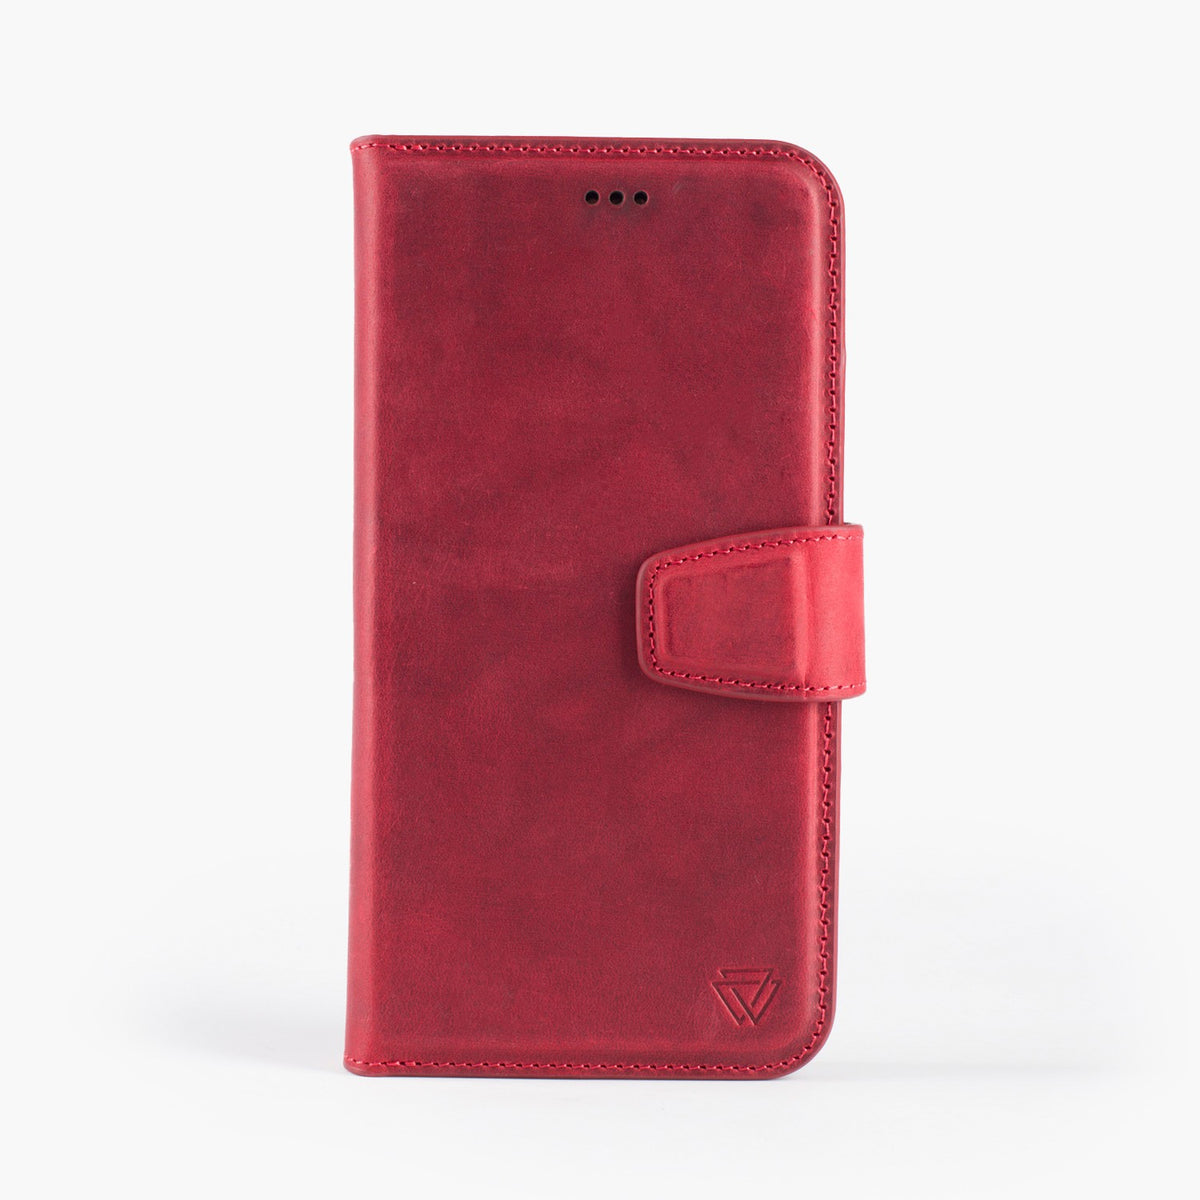 Wachikopa Genuine Leather Magic Book Case 2 in 1 for iPhone 7/8 Plus Red